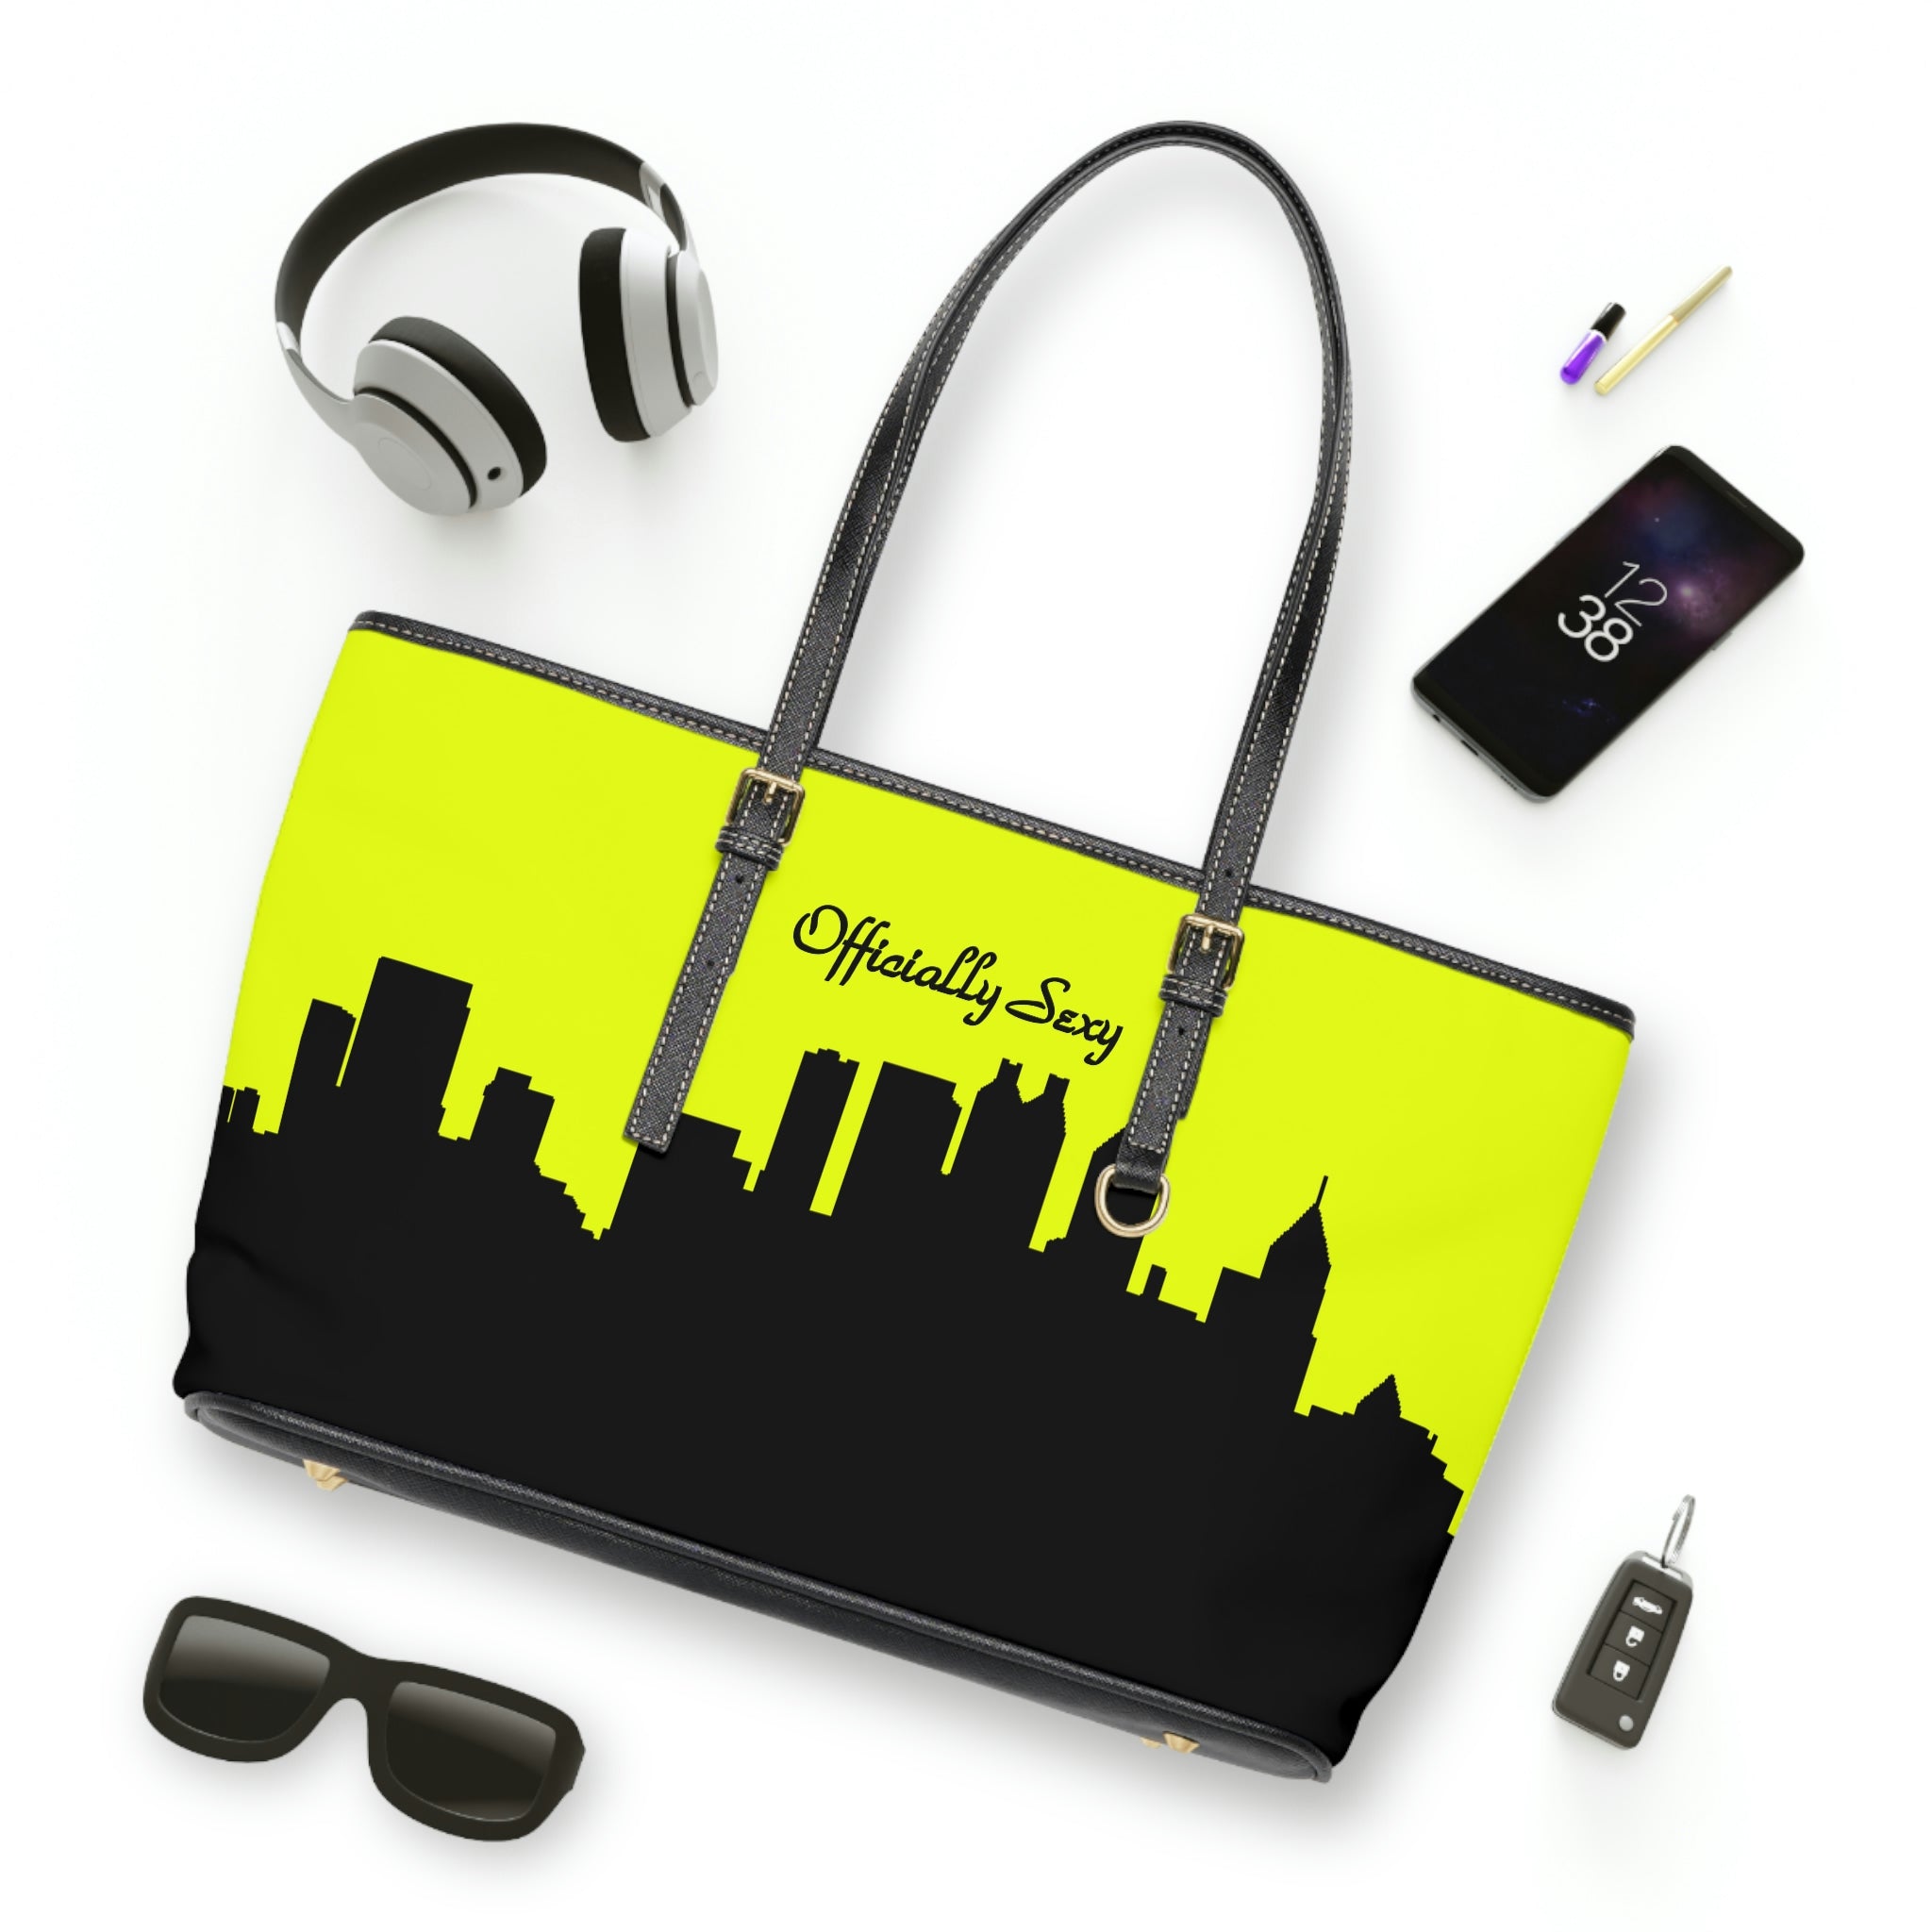 Officially Sexy Neon Yellow Skyline PU Leather Shoulder Bag